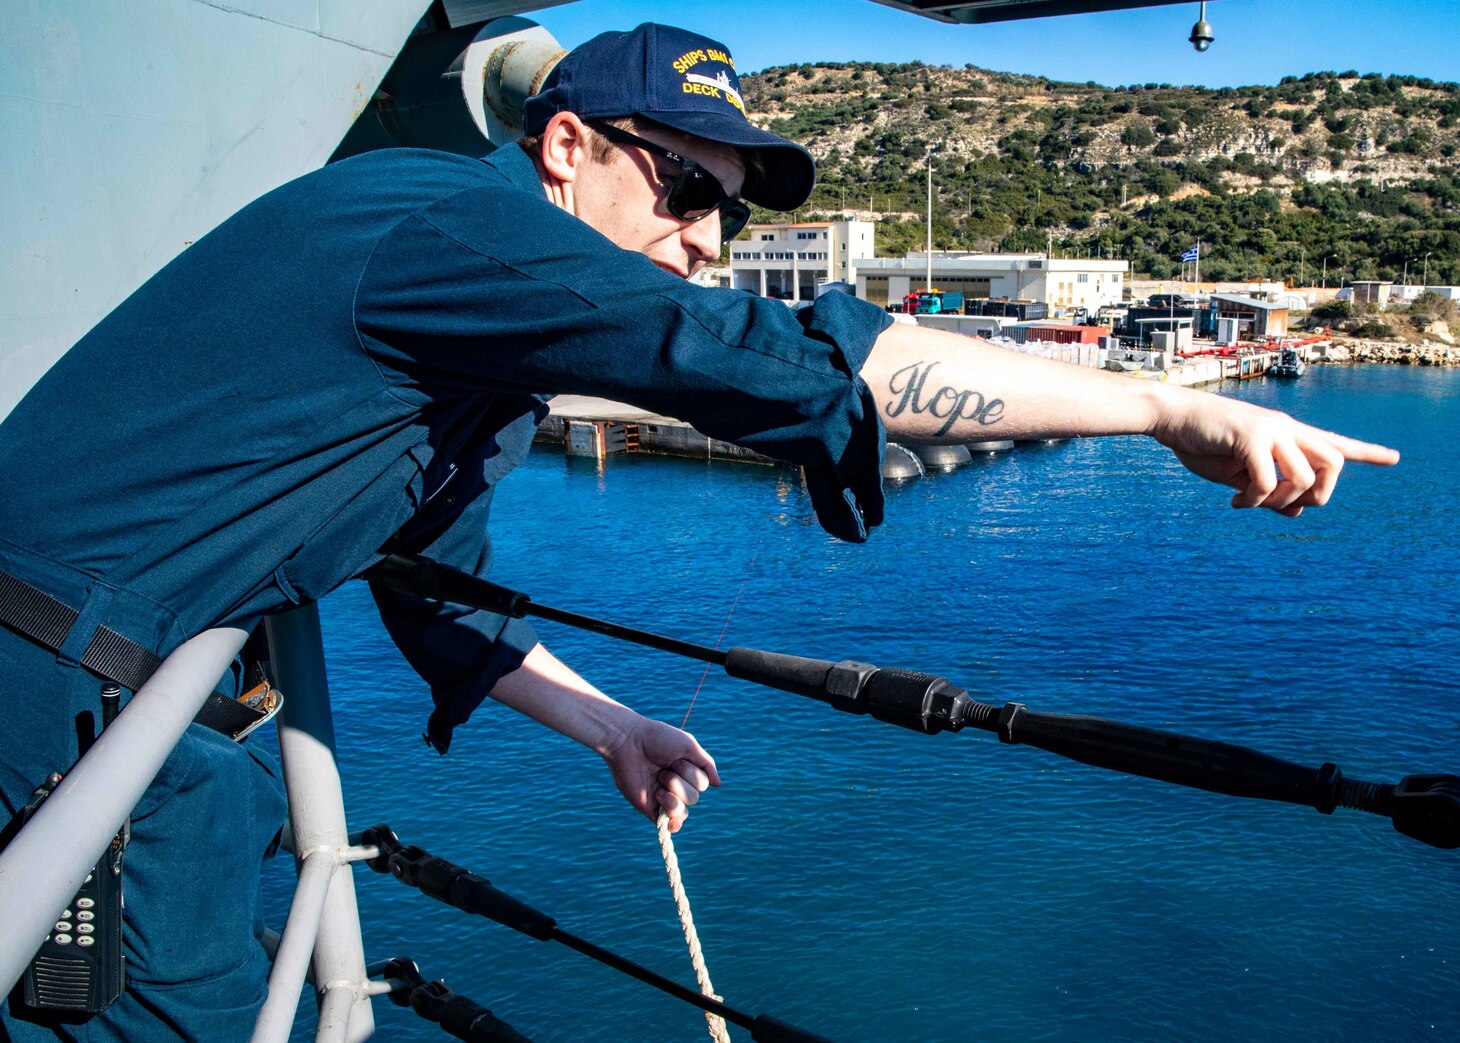 (March 10, 2023) Boatswain’s Mate 1st Class Alexander Padworski, assigned to the Nimitz-class aircraft carrier USS George H.W. Bush (CVN 77), directs Sailors as the ship, along with the embarked staff of Carrier Strike Group (CSG) 10, arrives in Souda Bay, Crete, for a scheduled port visit March 10, 2023. The George H.W. Bush CSG is on a scheduled deployment in the U.S. Naval Forces Europe area of operations, employed by U.S. Sixth Fleet to defend U.S., allied, and partner interests.